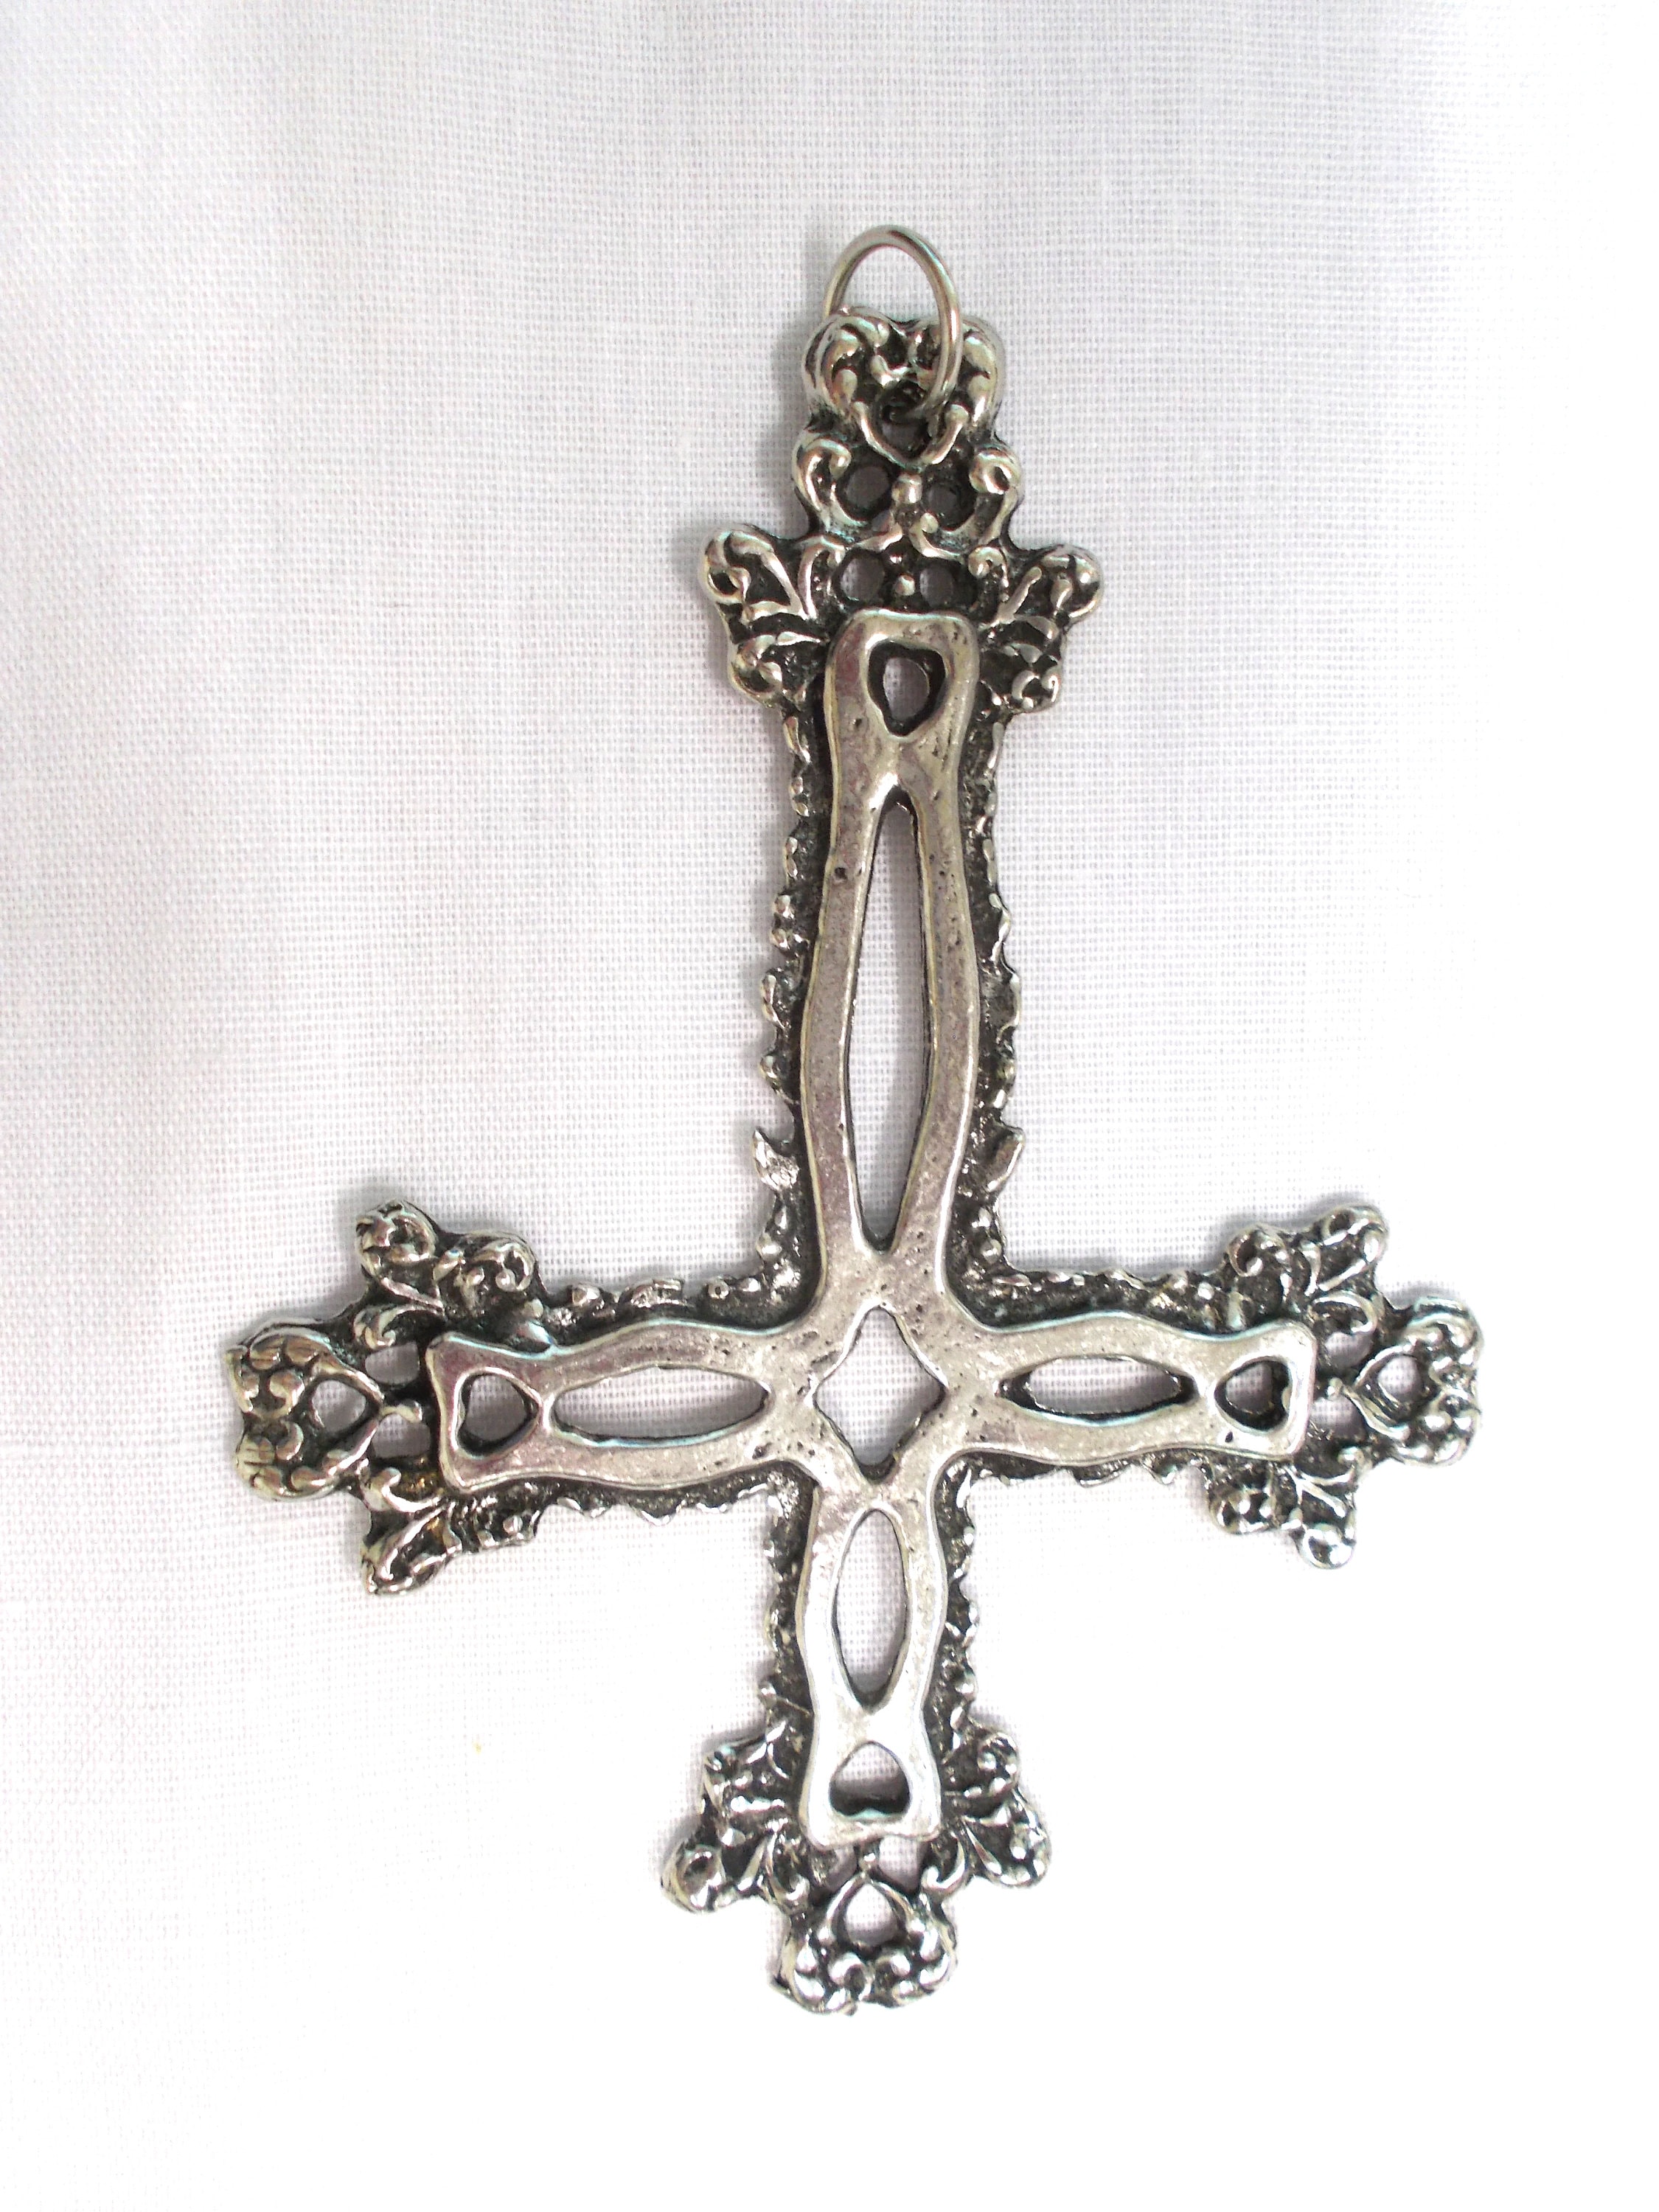 Buy St. Peter Inverted Upside Down Gothic Cross Pewter Pendant Charm Amulet  Black W Stainless Steel Chain at